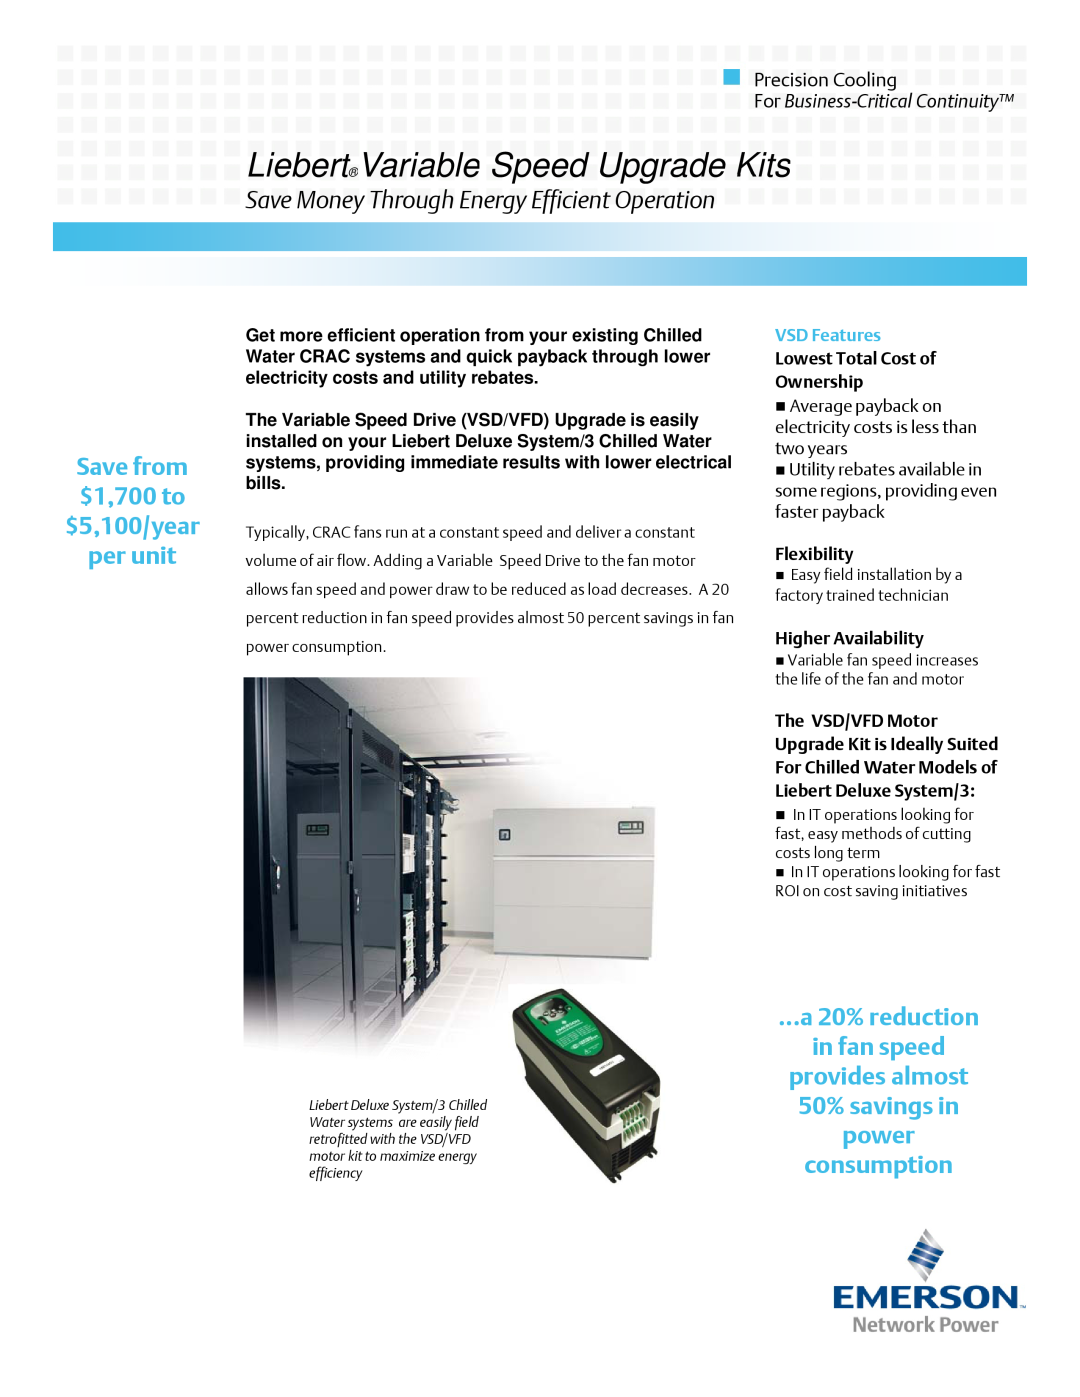 Emerson Precision Cooling manual VSD Features, LiebertVariable Speed Upgrade Kits, in fan speed, power, …a 20% reduction 